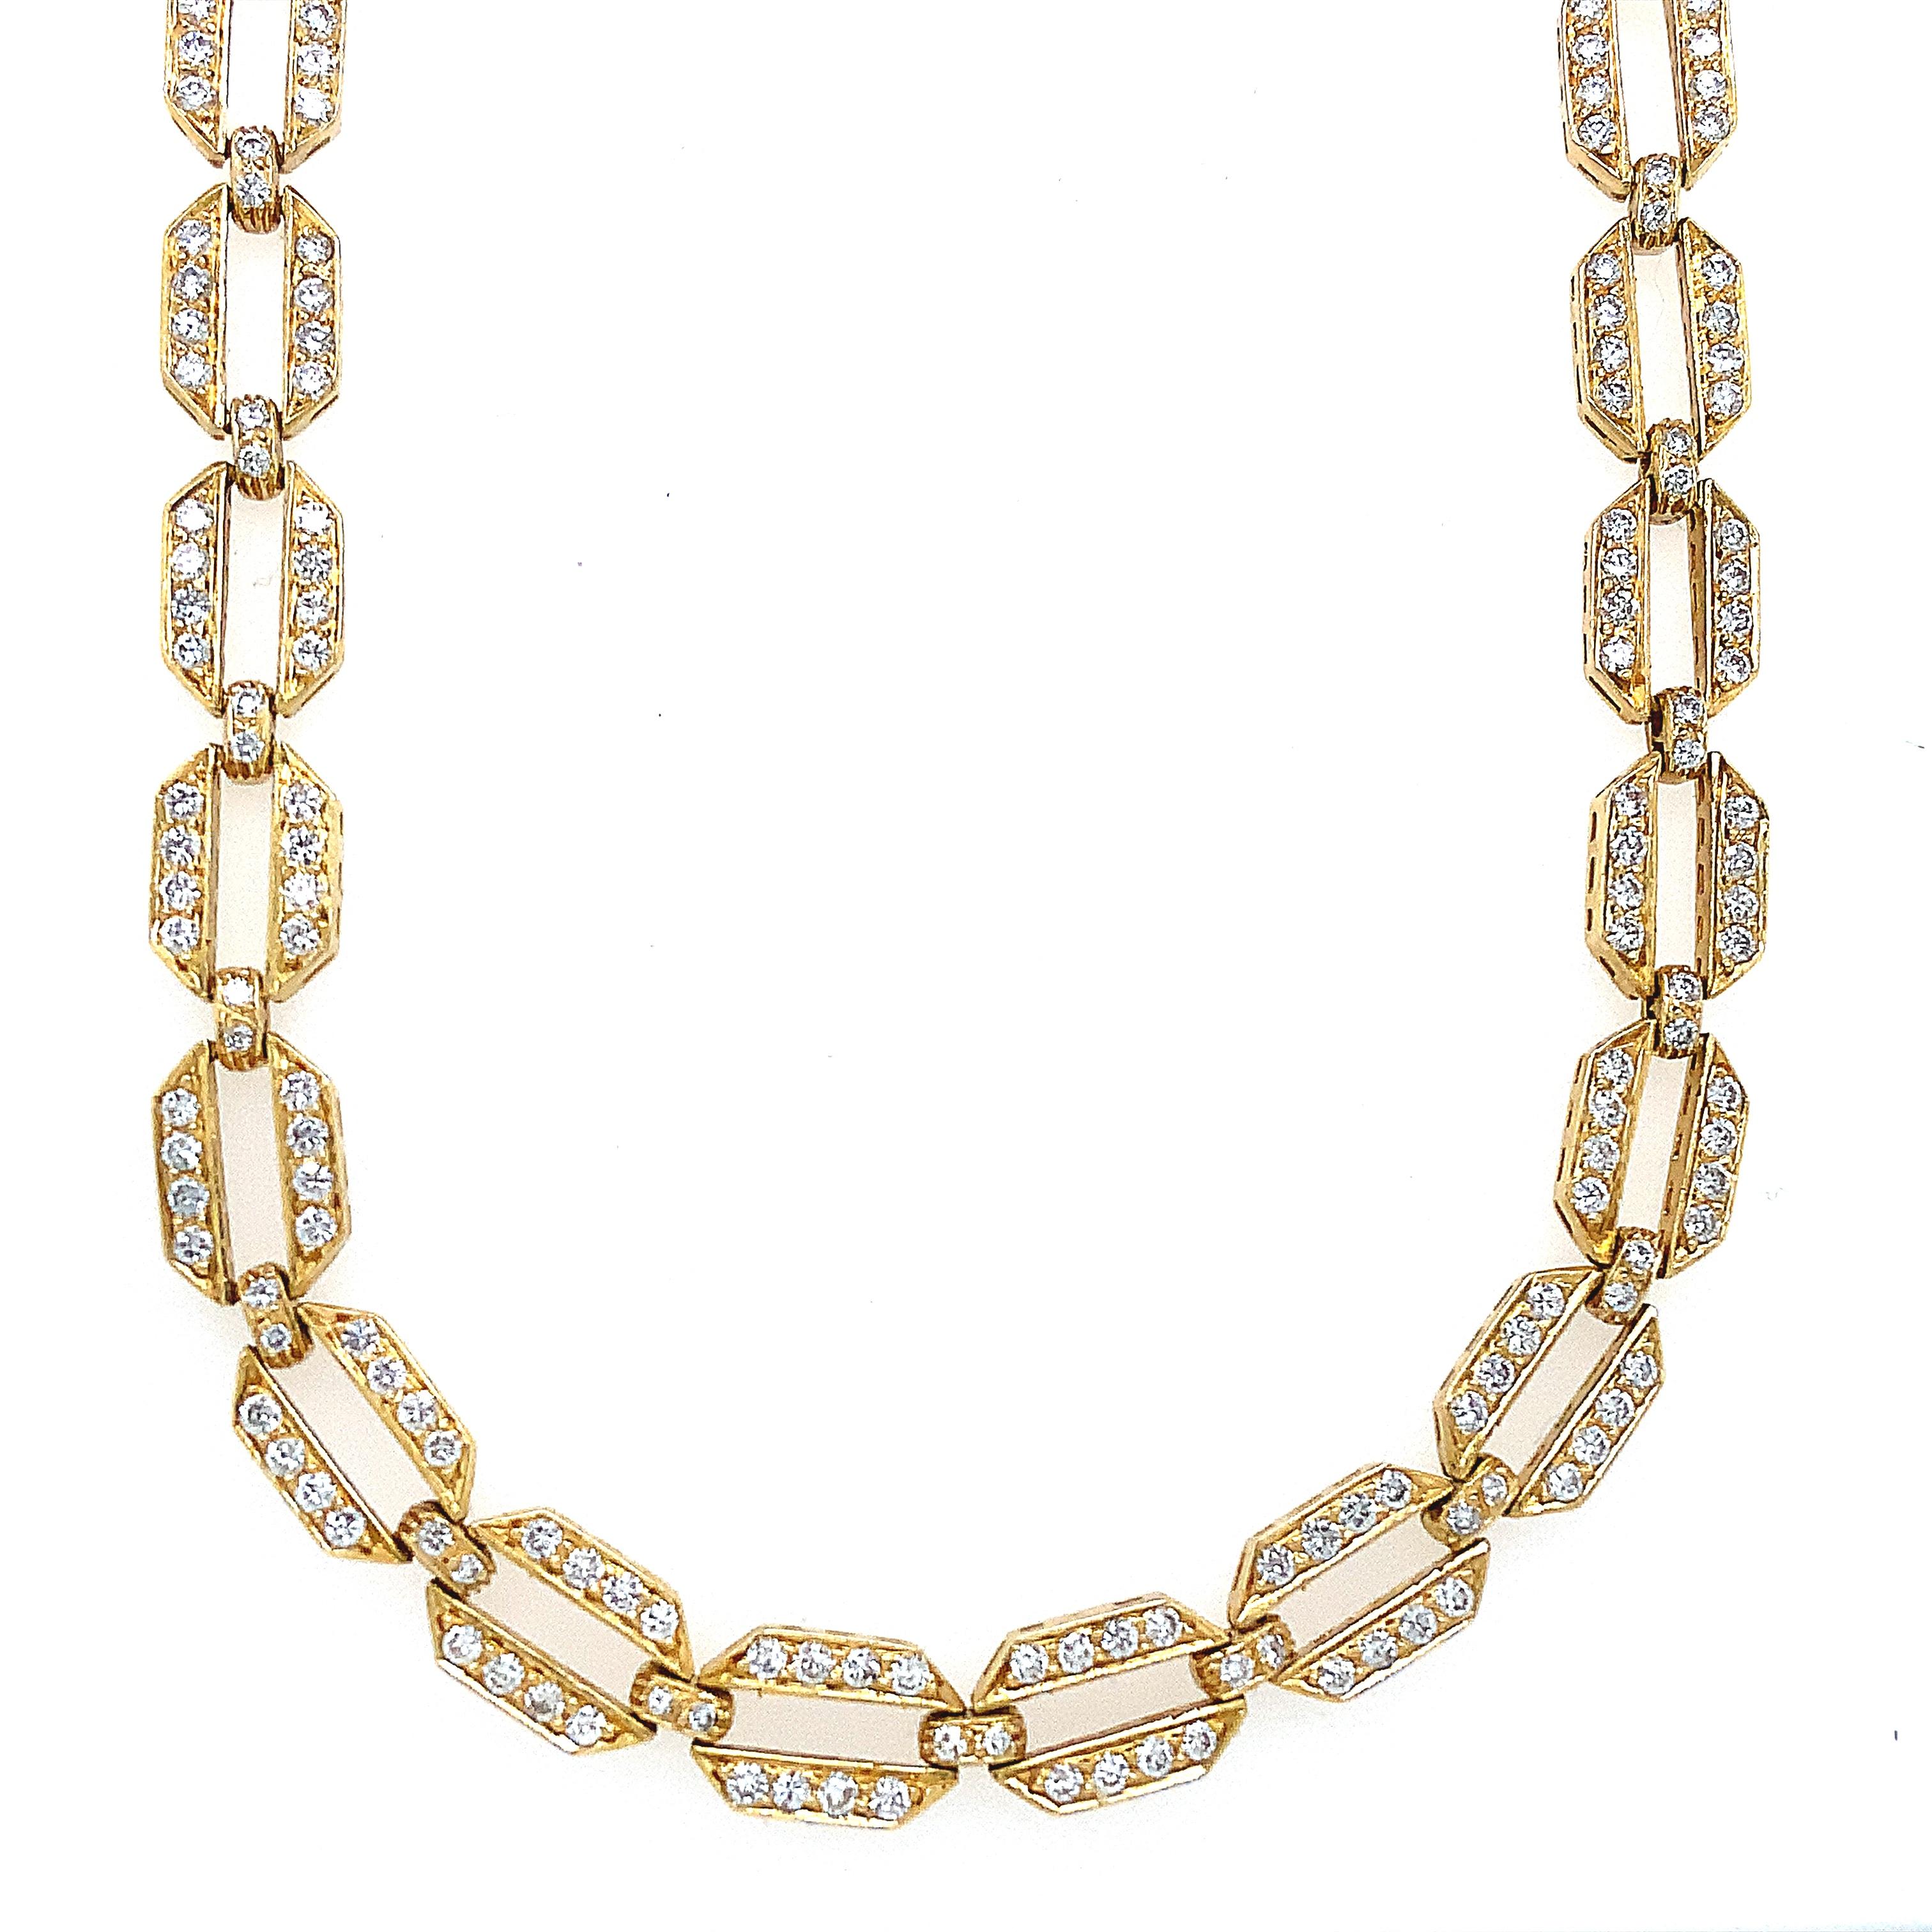 This one-of-a-kind Vintage necklace exhibits a 750 gold stamp and is crafted from yellow gold. It features a total of 51 links and 50 connections, all securely mitigated with a clasp. This exquisite sight is adorned with 512 round, brilliant-cut